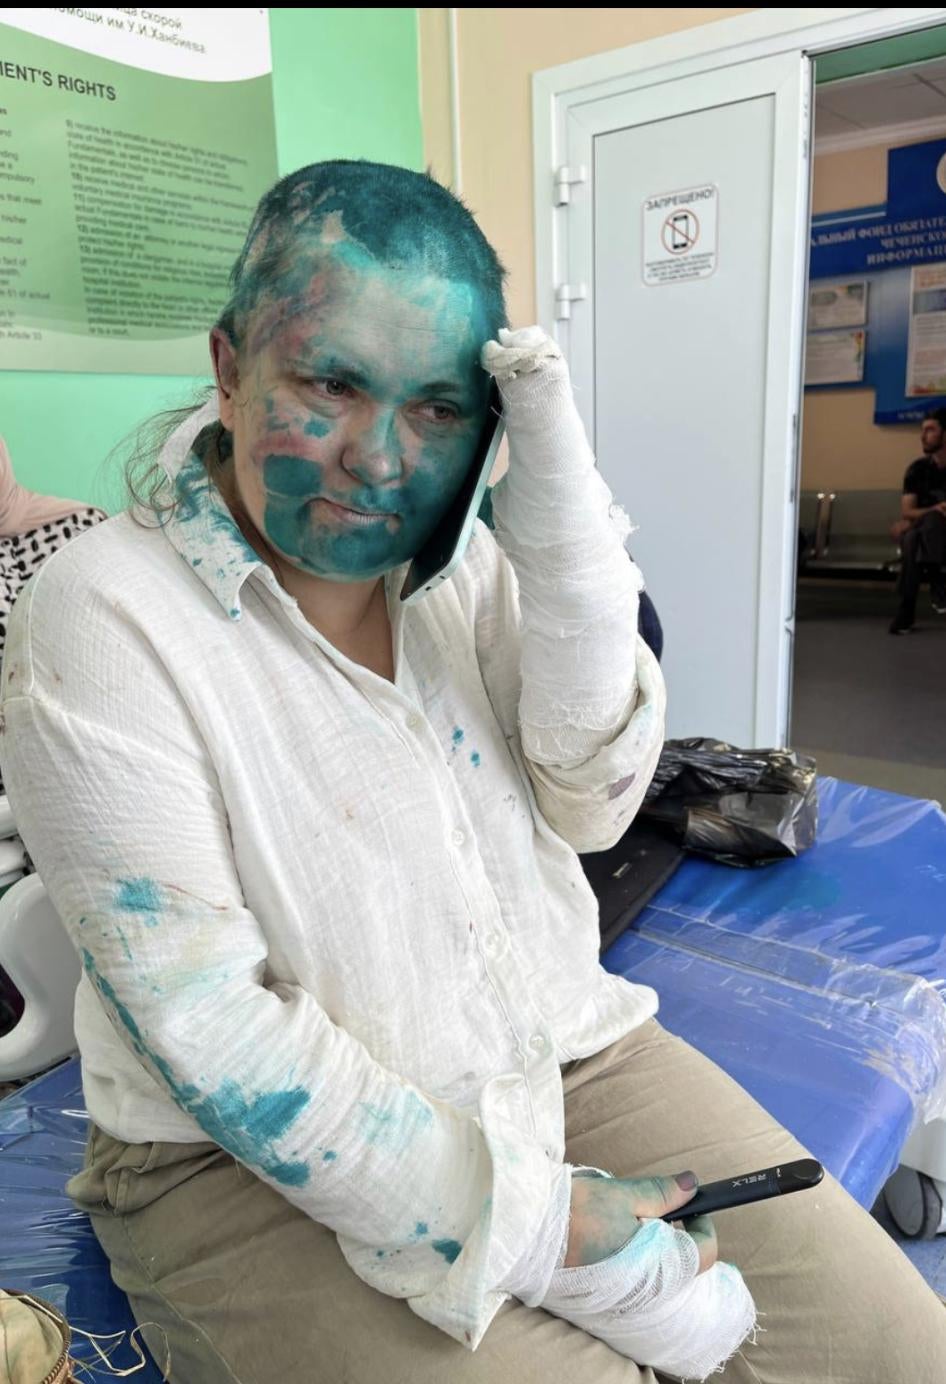 Elena Milashina in a hospital in Grozny, Chechnya after being violently attack on July 4, 2023